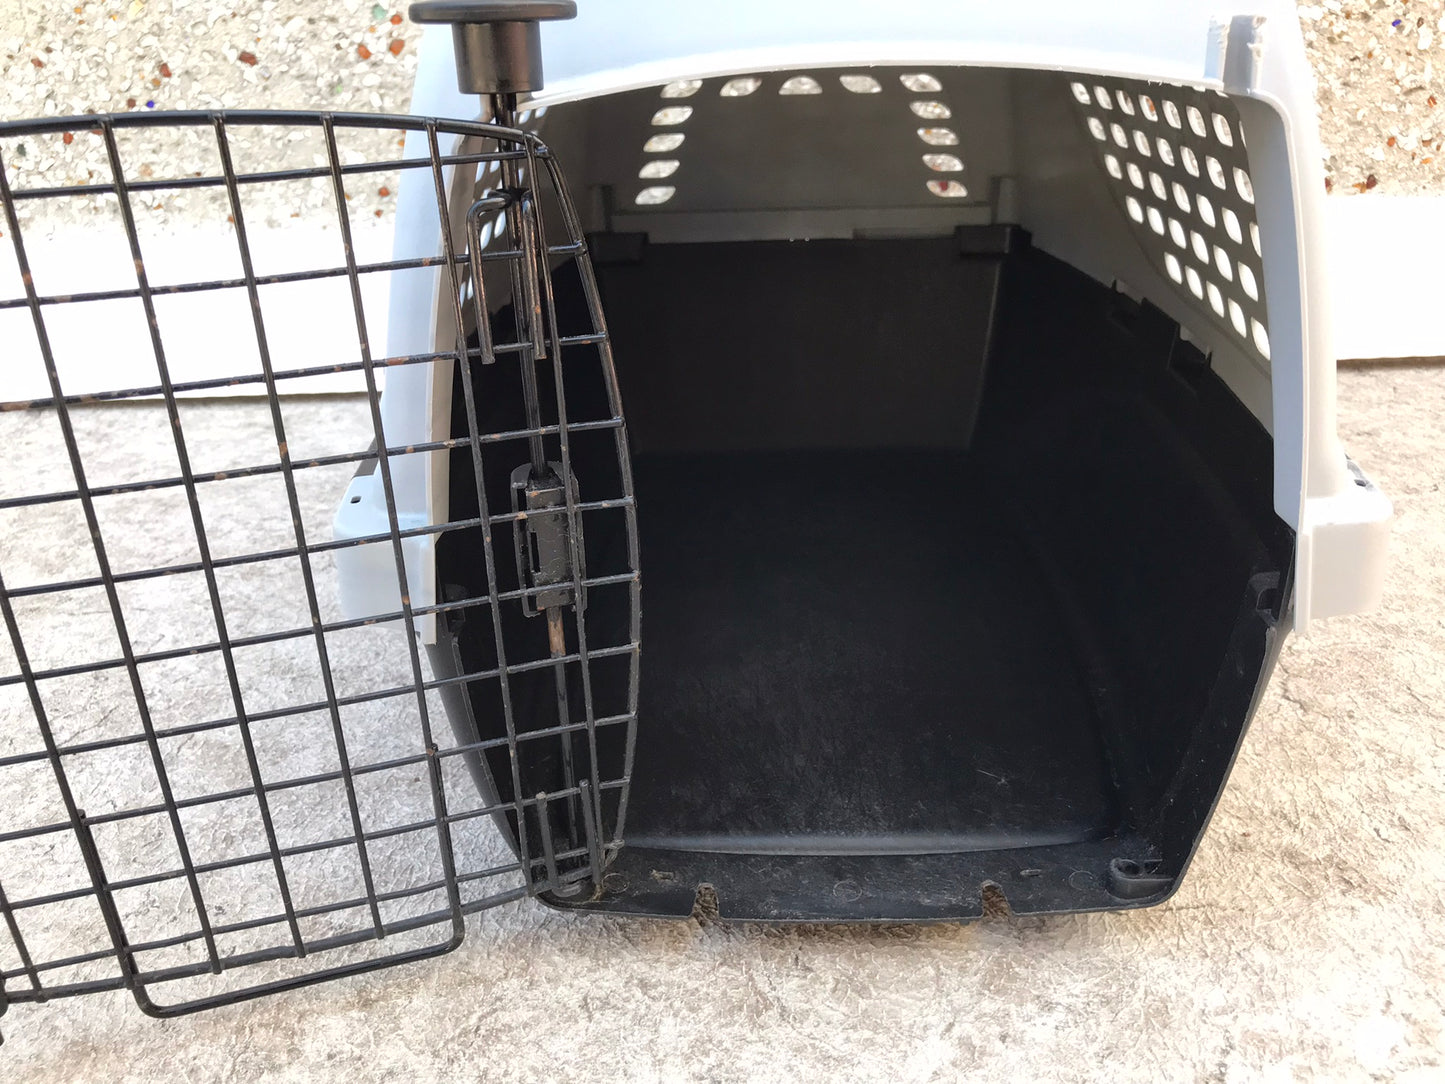 My Little Pet Shop Dog Cat Puppy Kennel Crate Excellent Grey 22 inchs Up To 20lbs